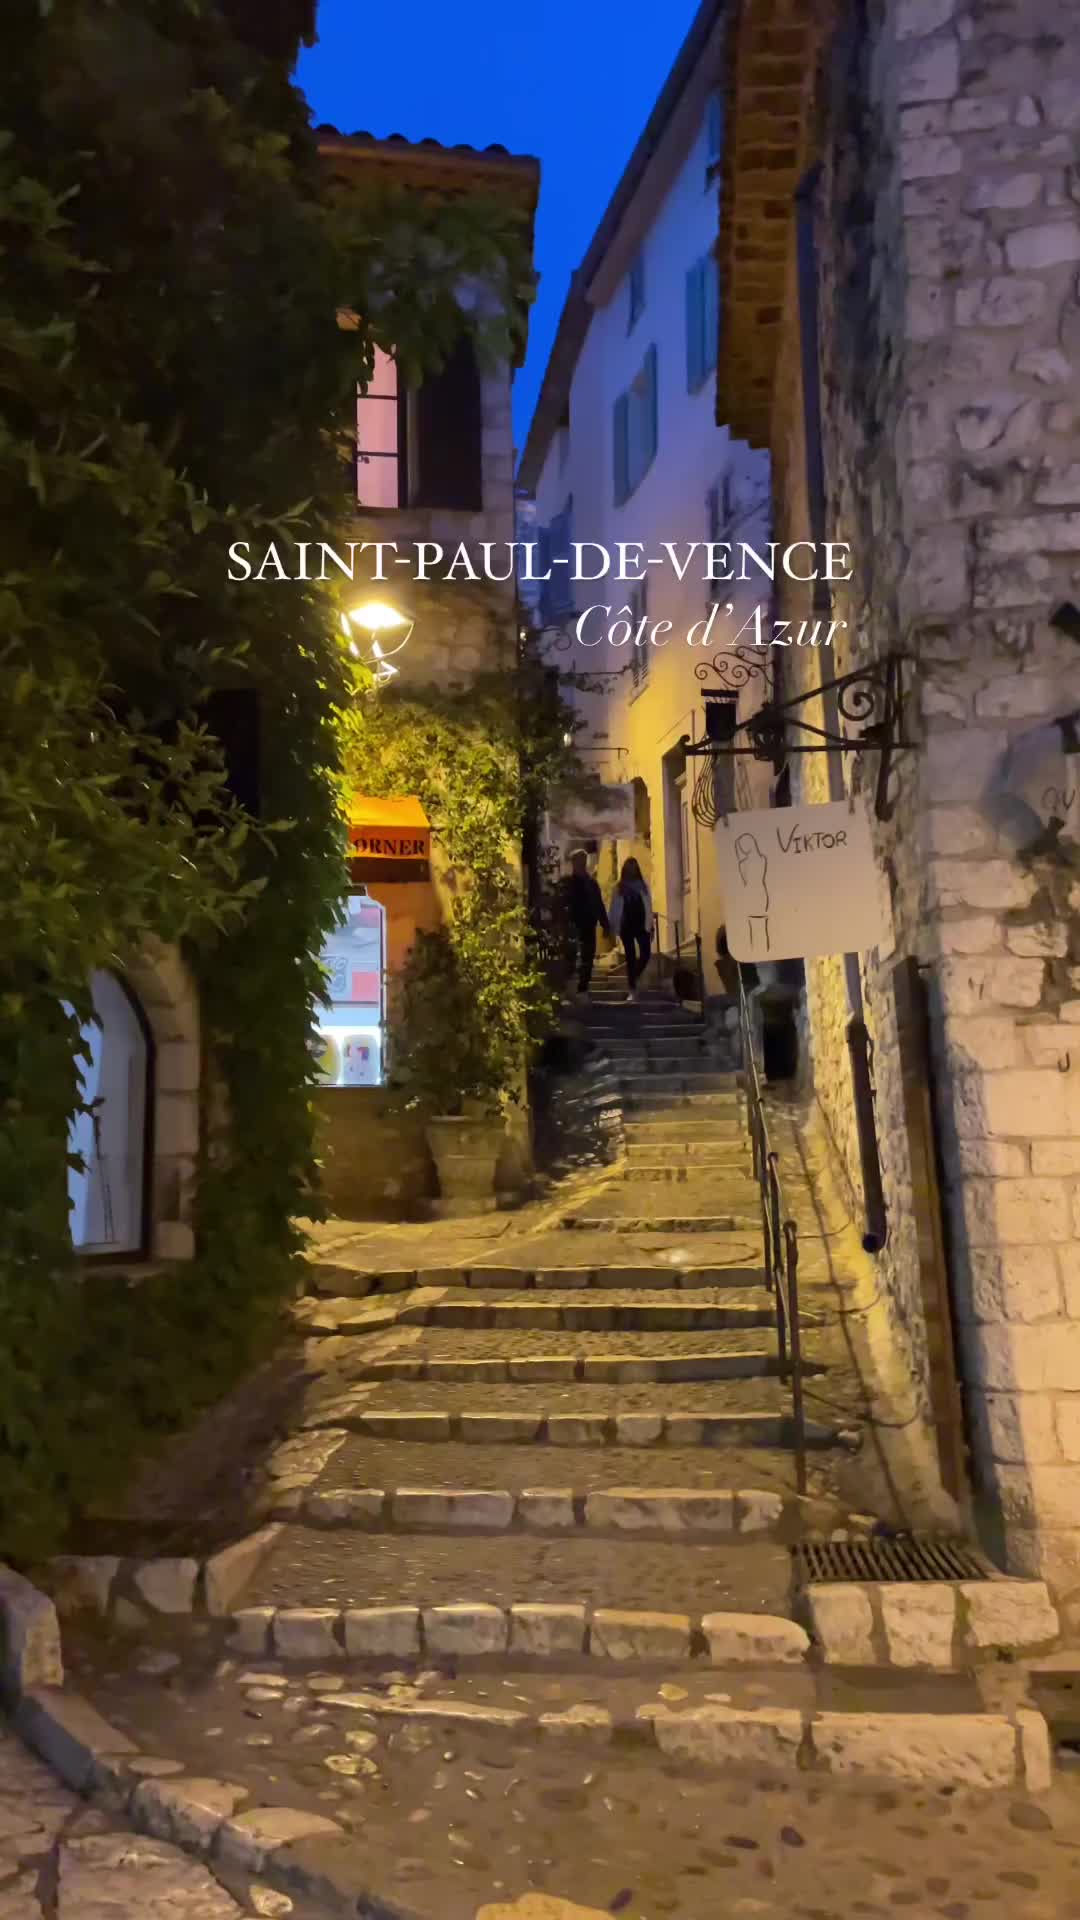 Saint-Paul-de-Vence in the evening 😍🇫🇷 it’s one of the most beautiful villages on the Côte d’Azur ✨

#saintpauldevence #stpauldevence #cotedazur #cotedazurfrance #frenchriviera #france #southoffrance #provence #francetourisme#map_of_europe #francia #explorefrance #beautifuldestinations #frança